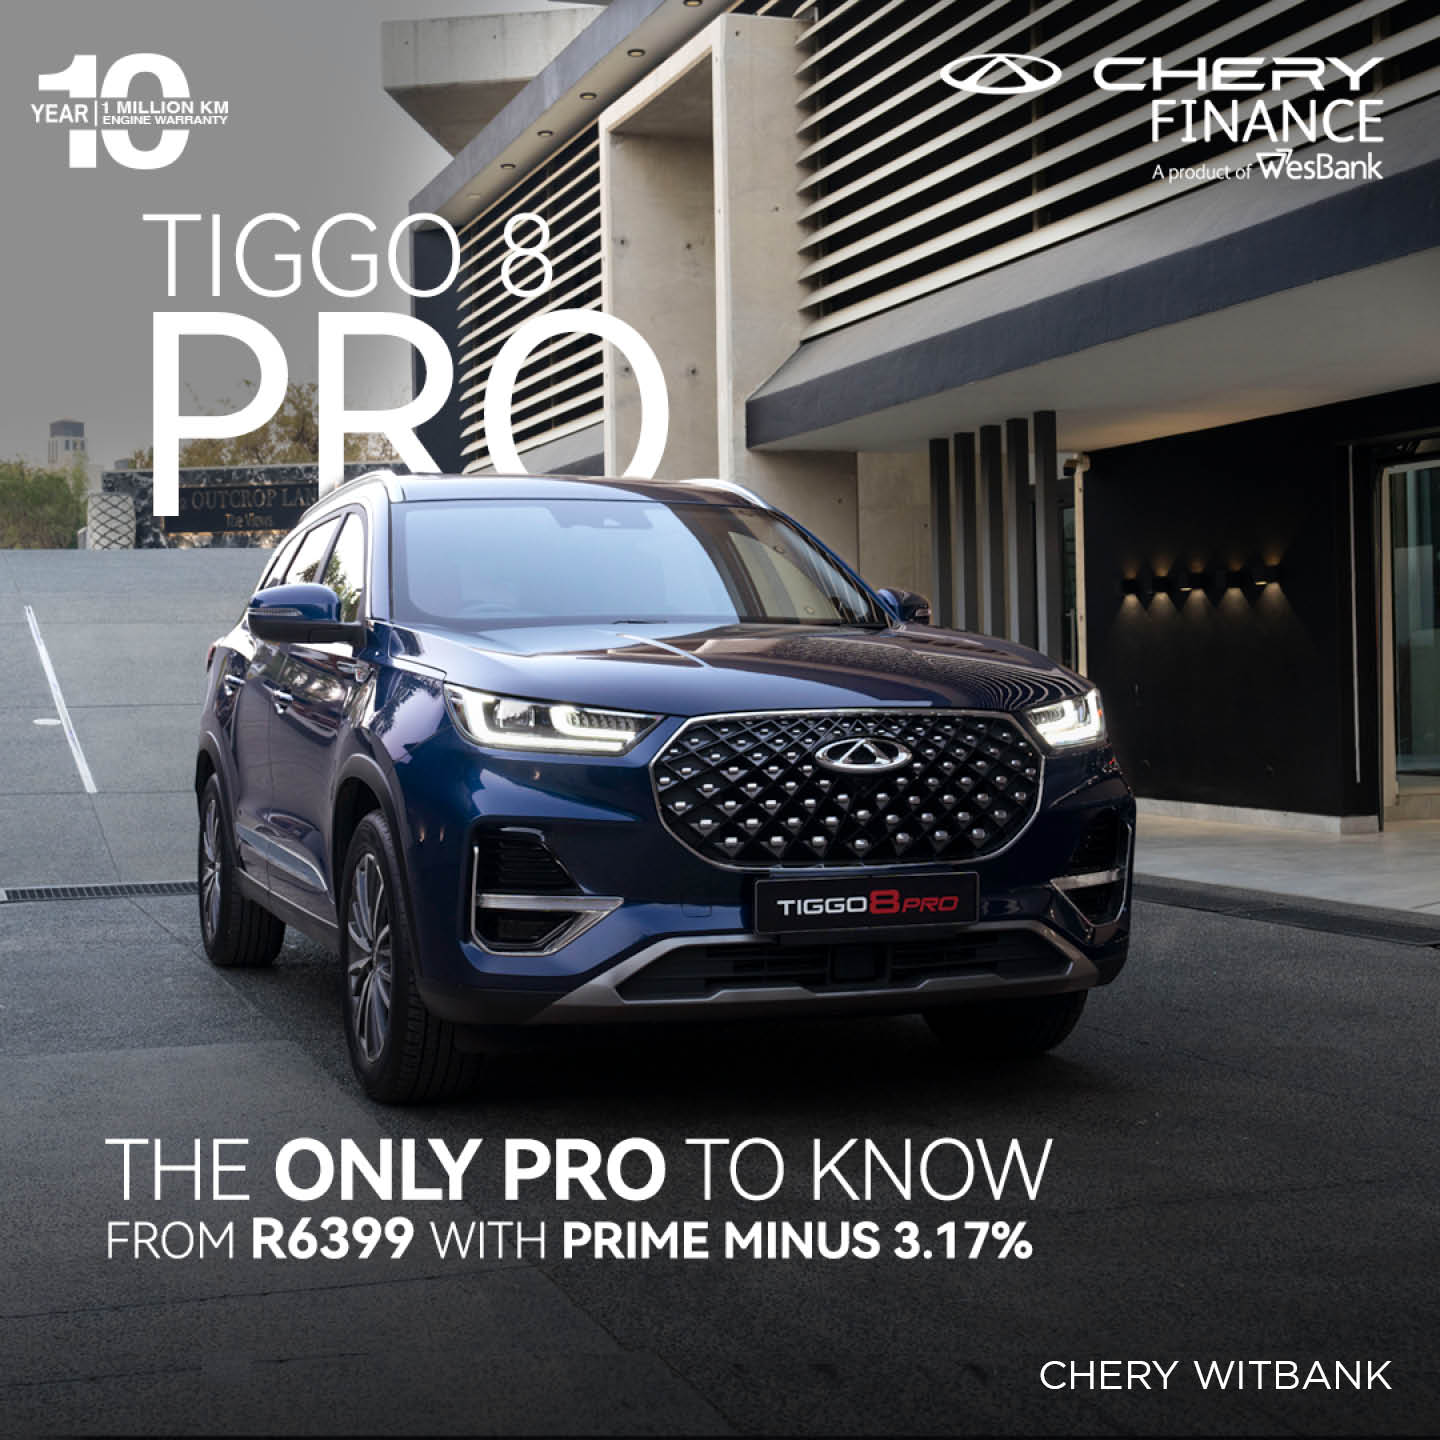 Executive appeal is what you can expect from the first class TIGGO 8 Pro image from 